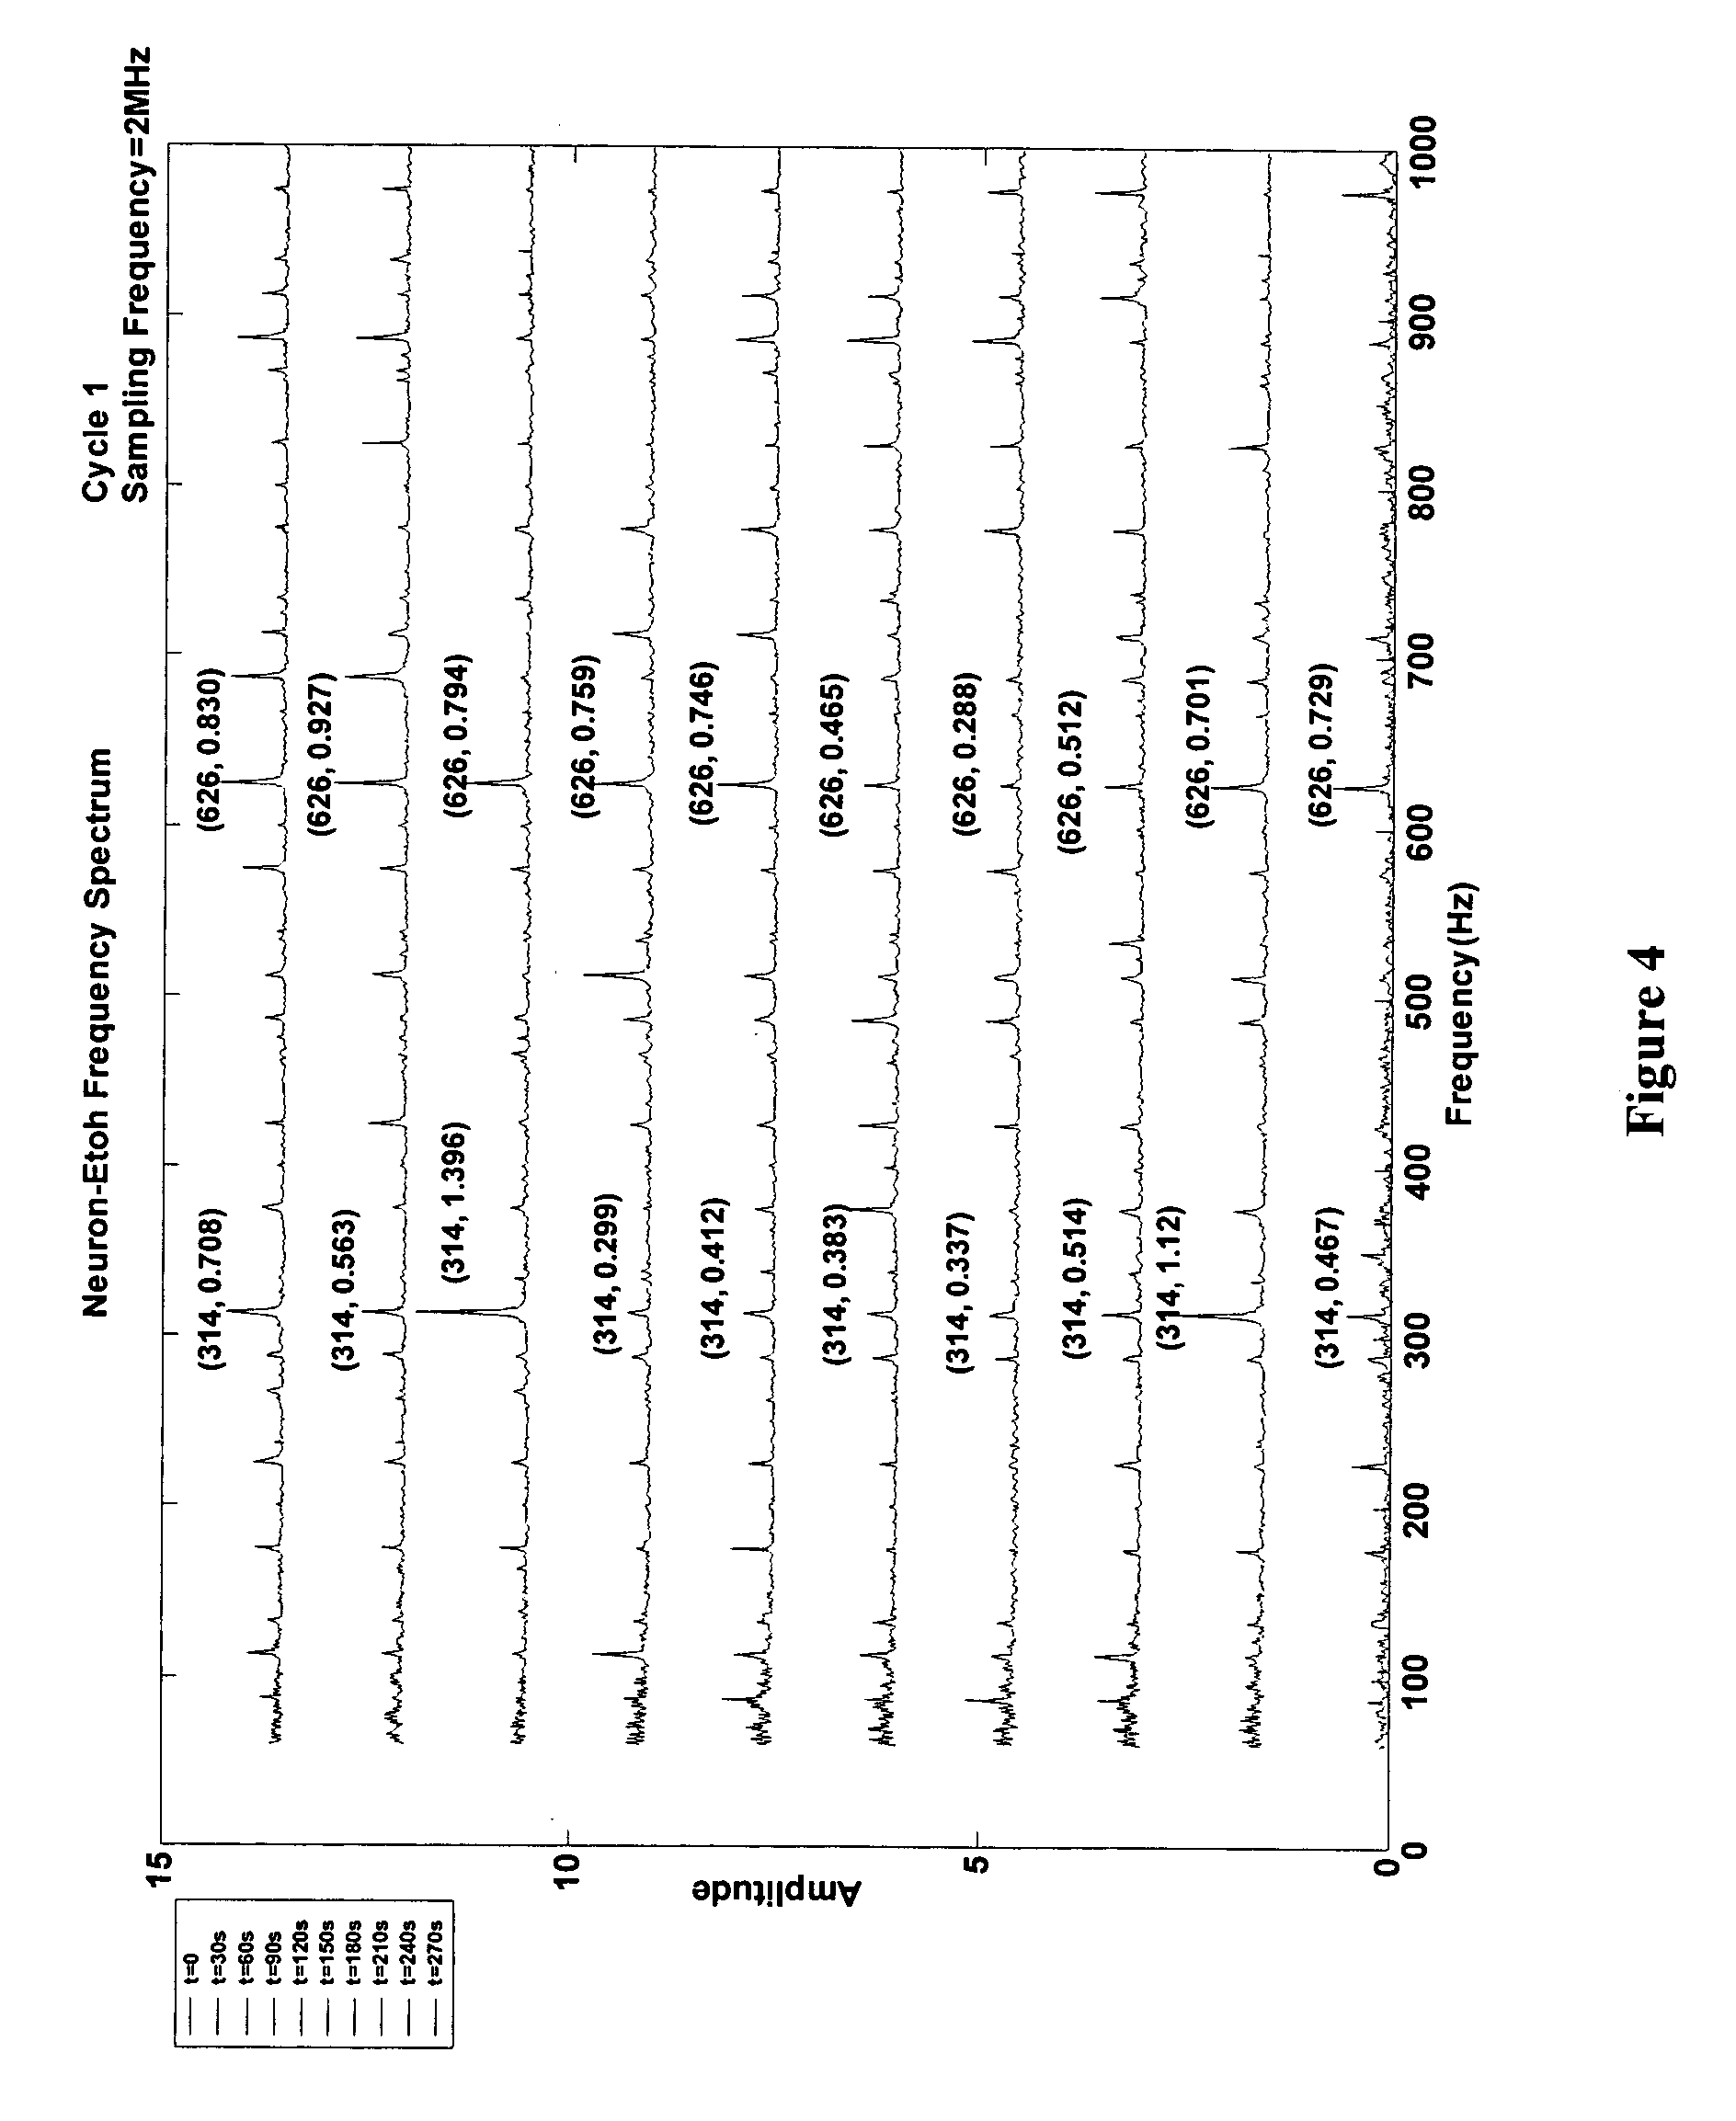 Biosensors having single reactant components immobilized over single electrodes and methods of making and using thereof